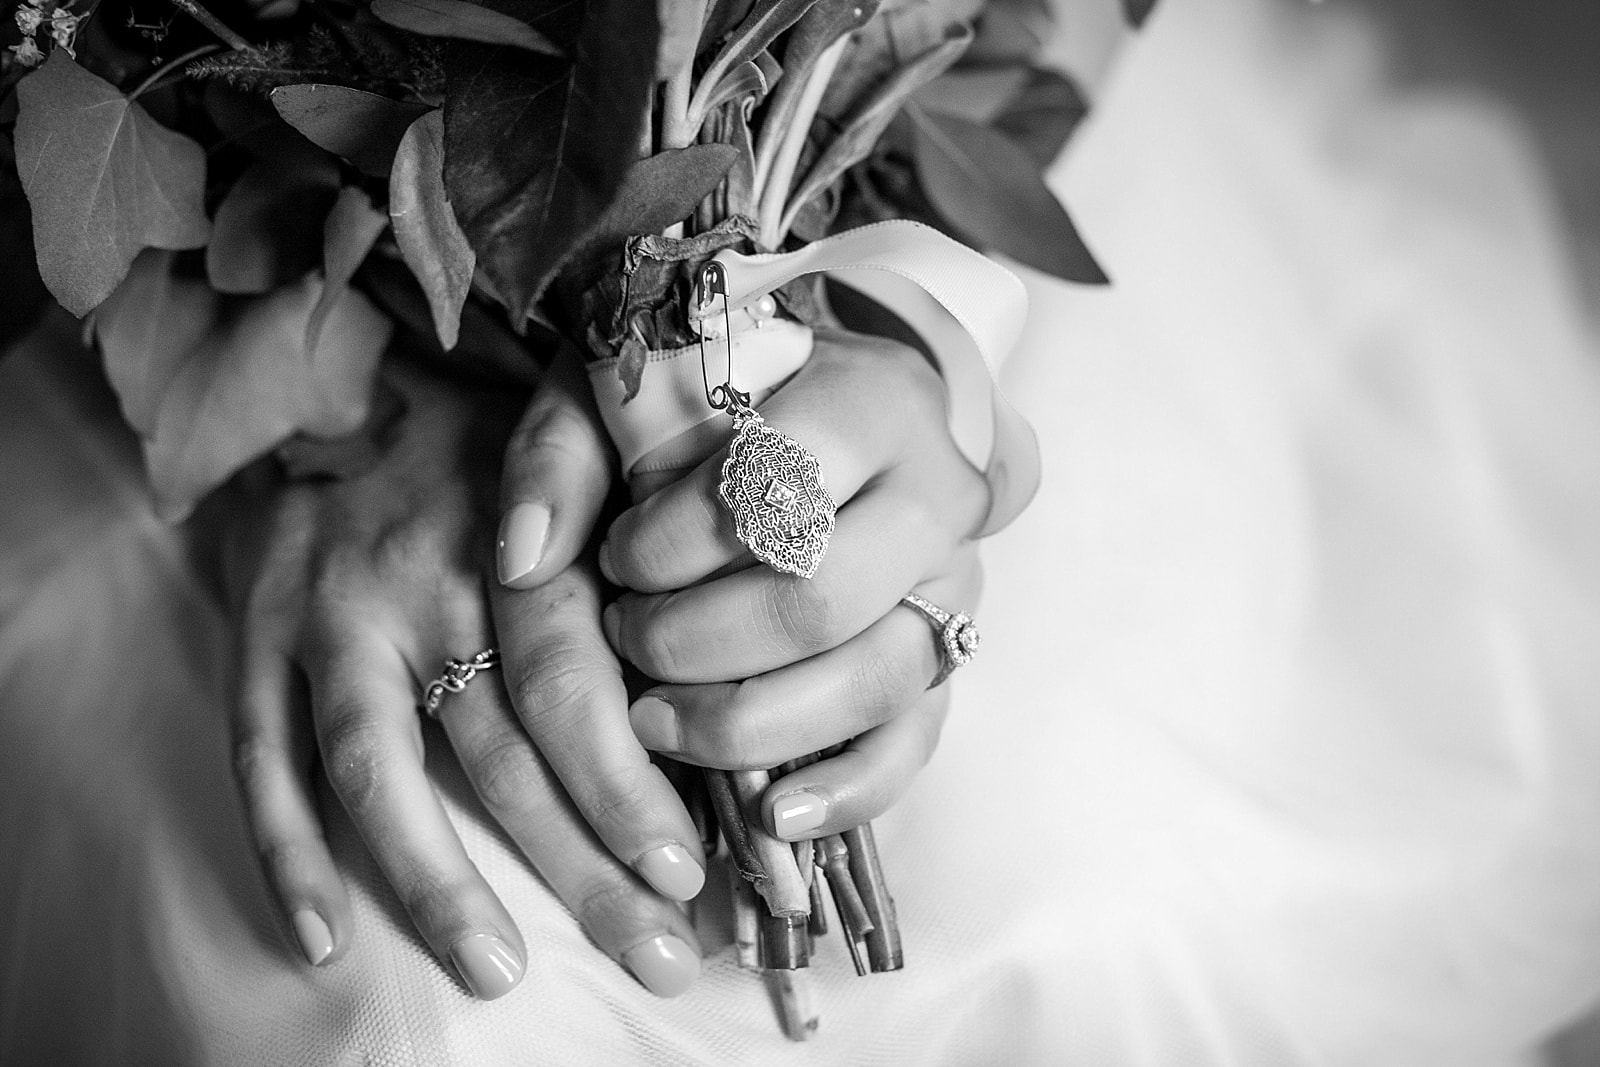 Bridal bouquet, charm, and ring details in black and white